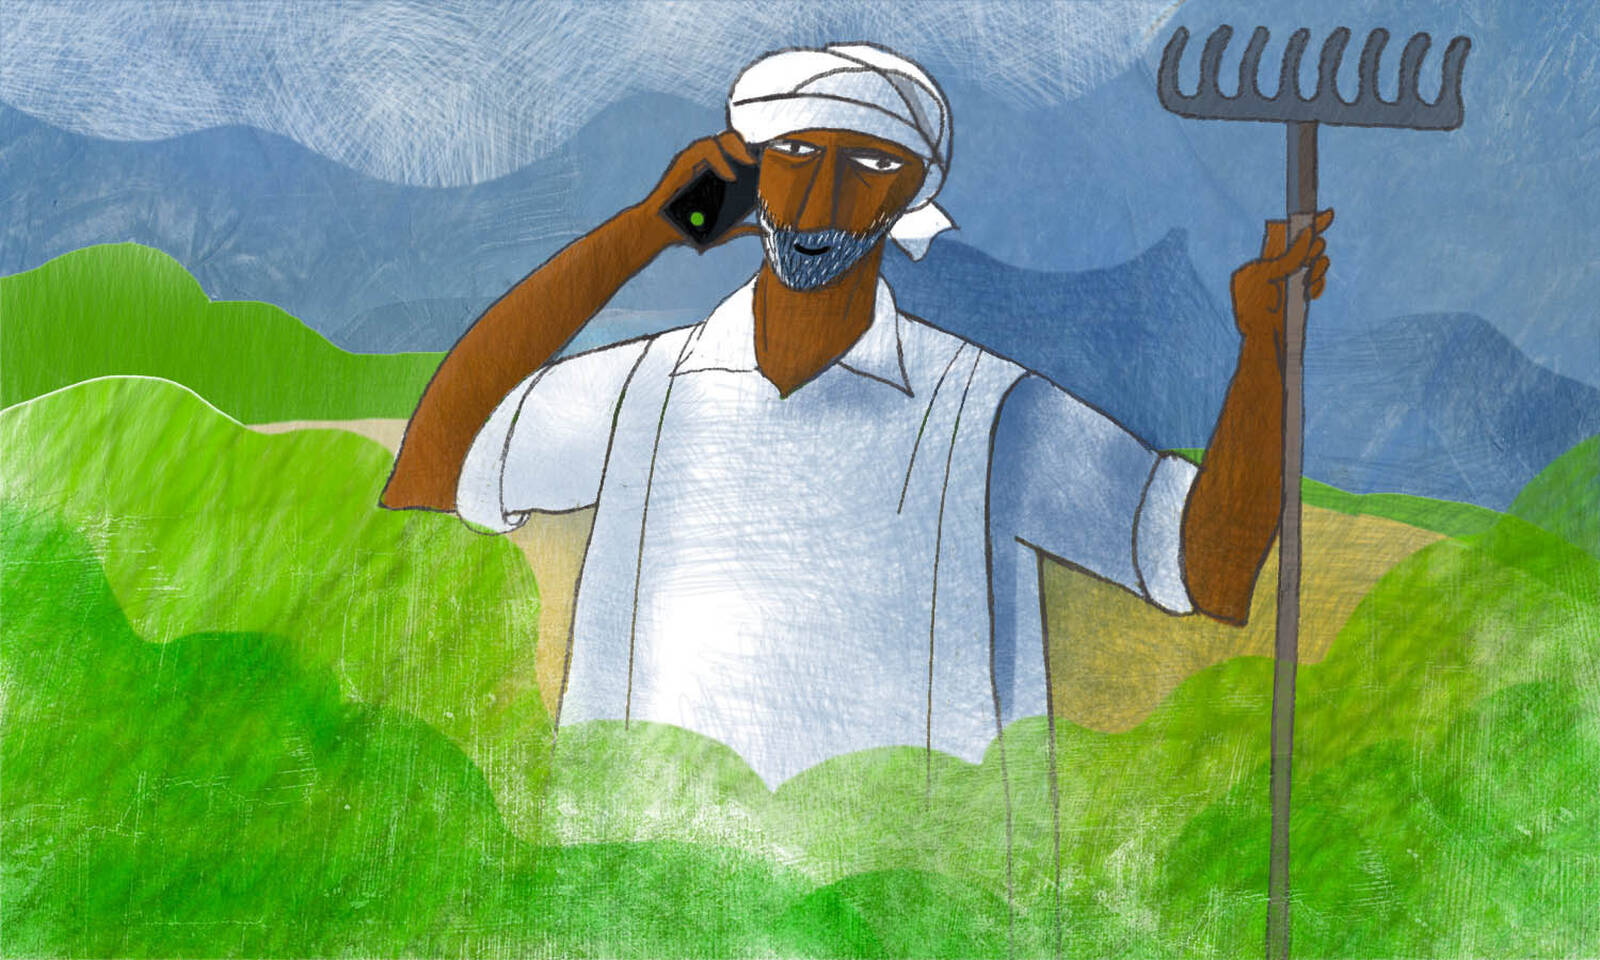 Indian farmer using cell phone